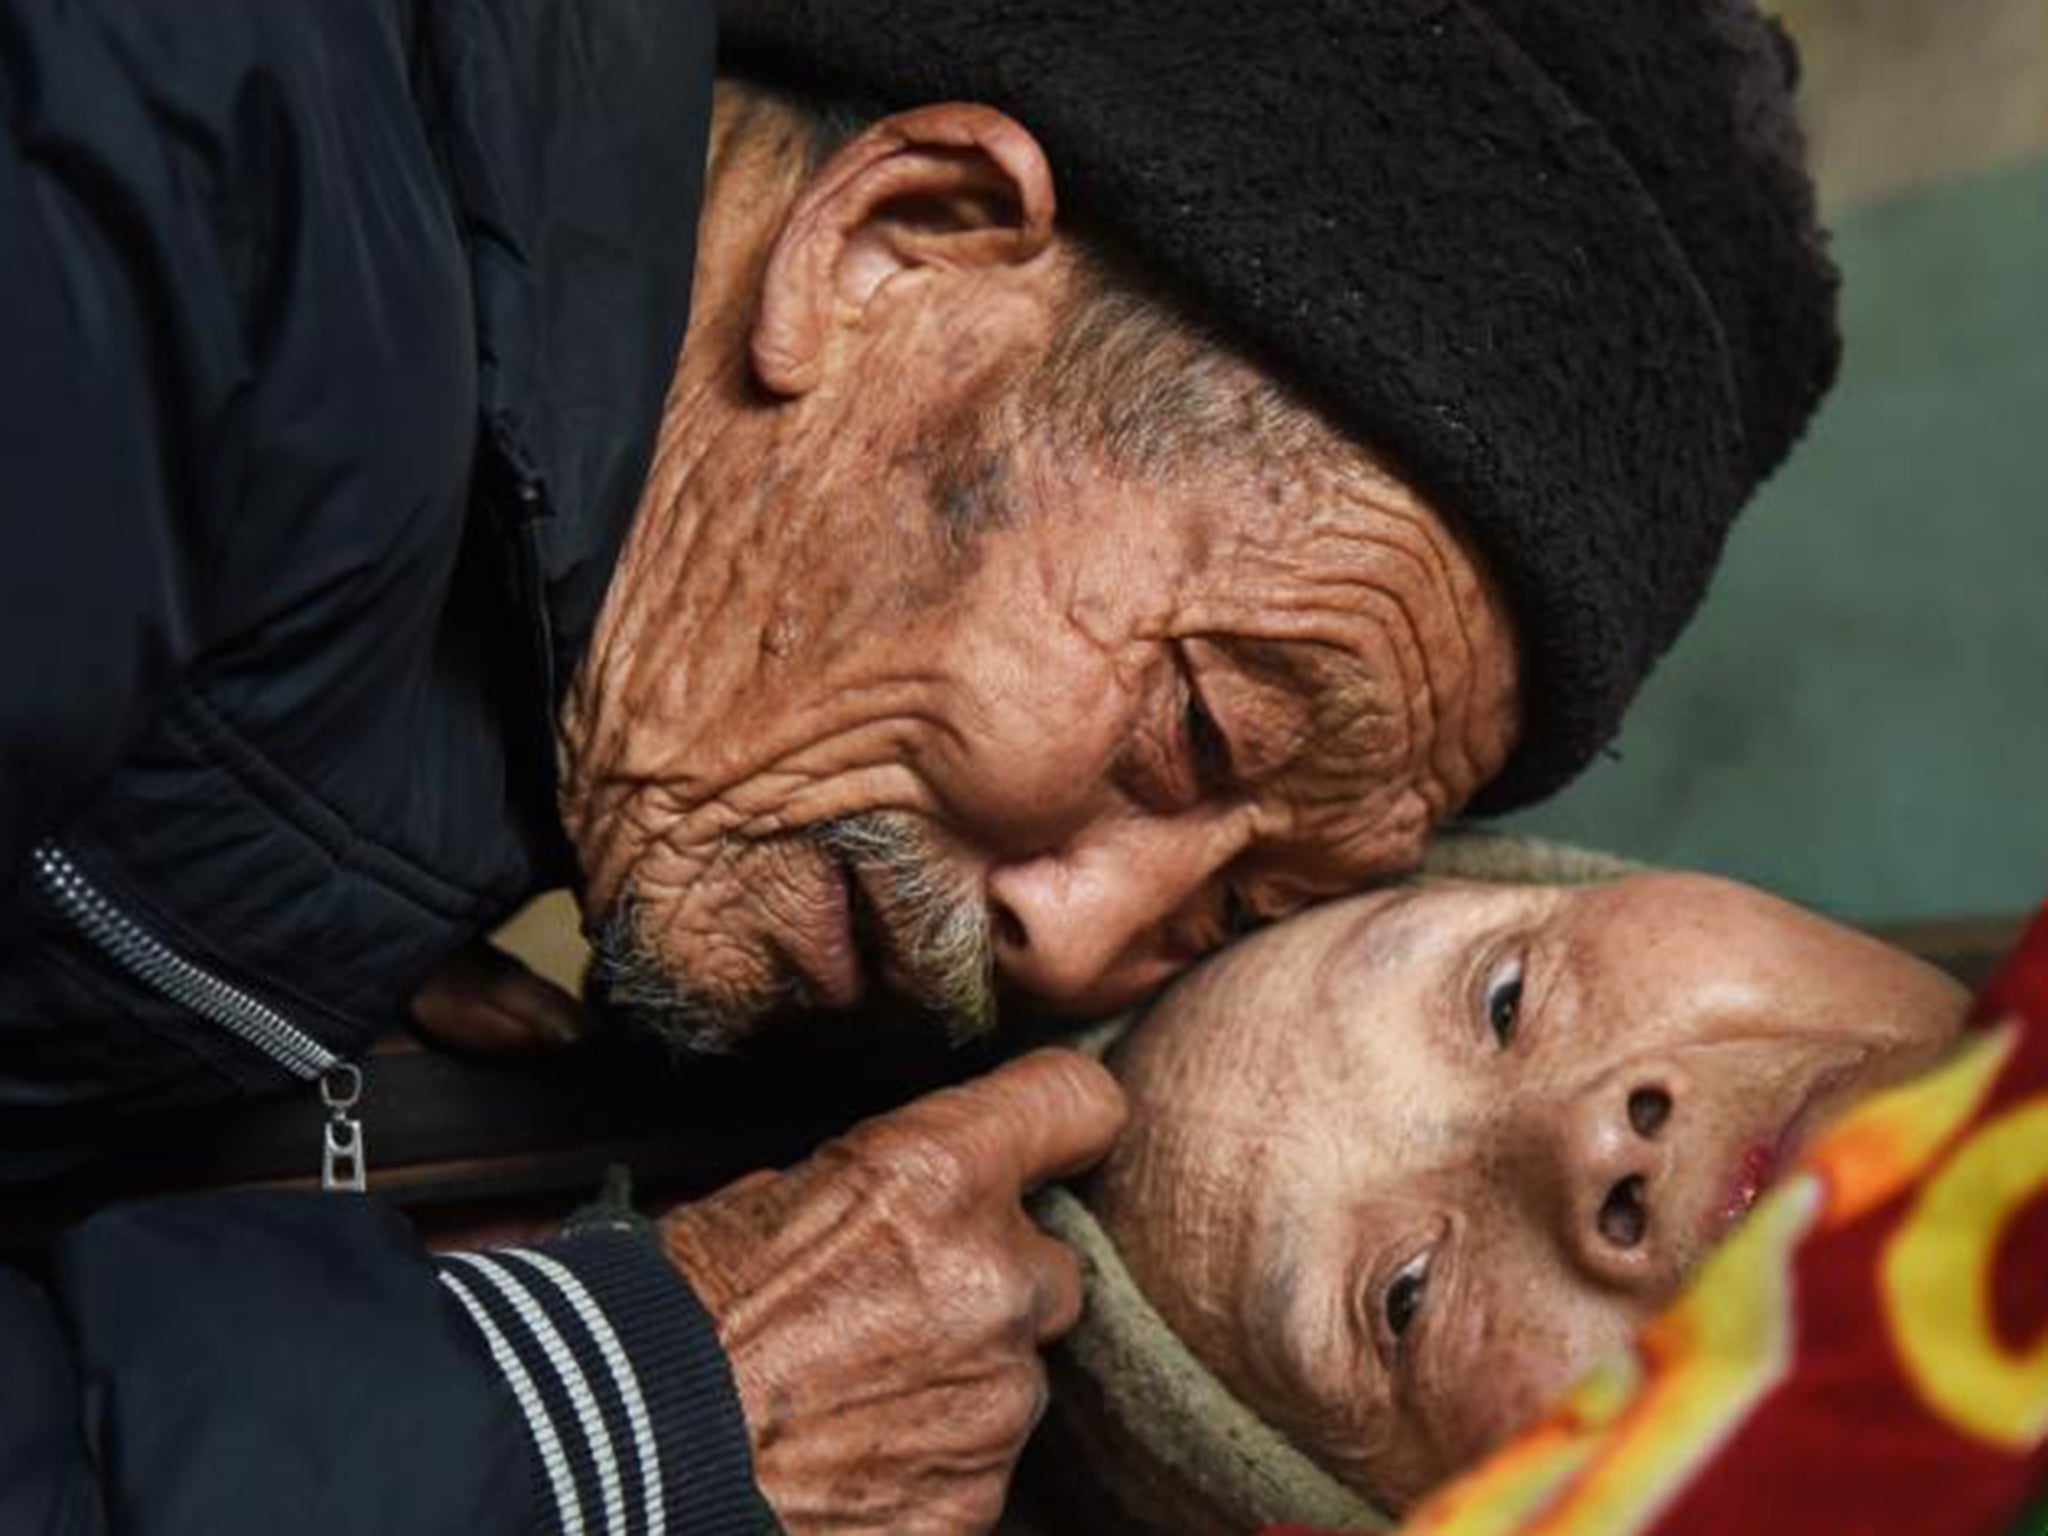 Du Yuanfa, 84, spoon-feeds his wife and changes her bed-pans